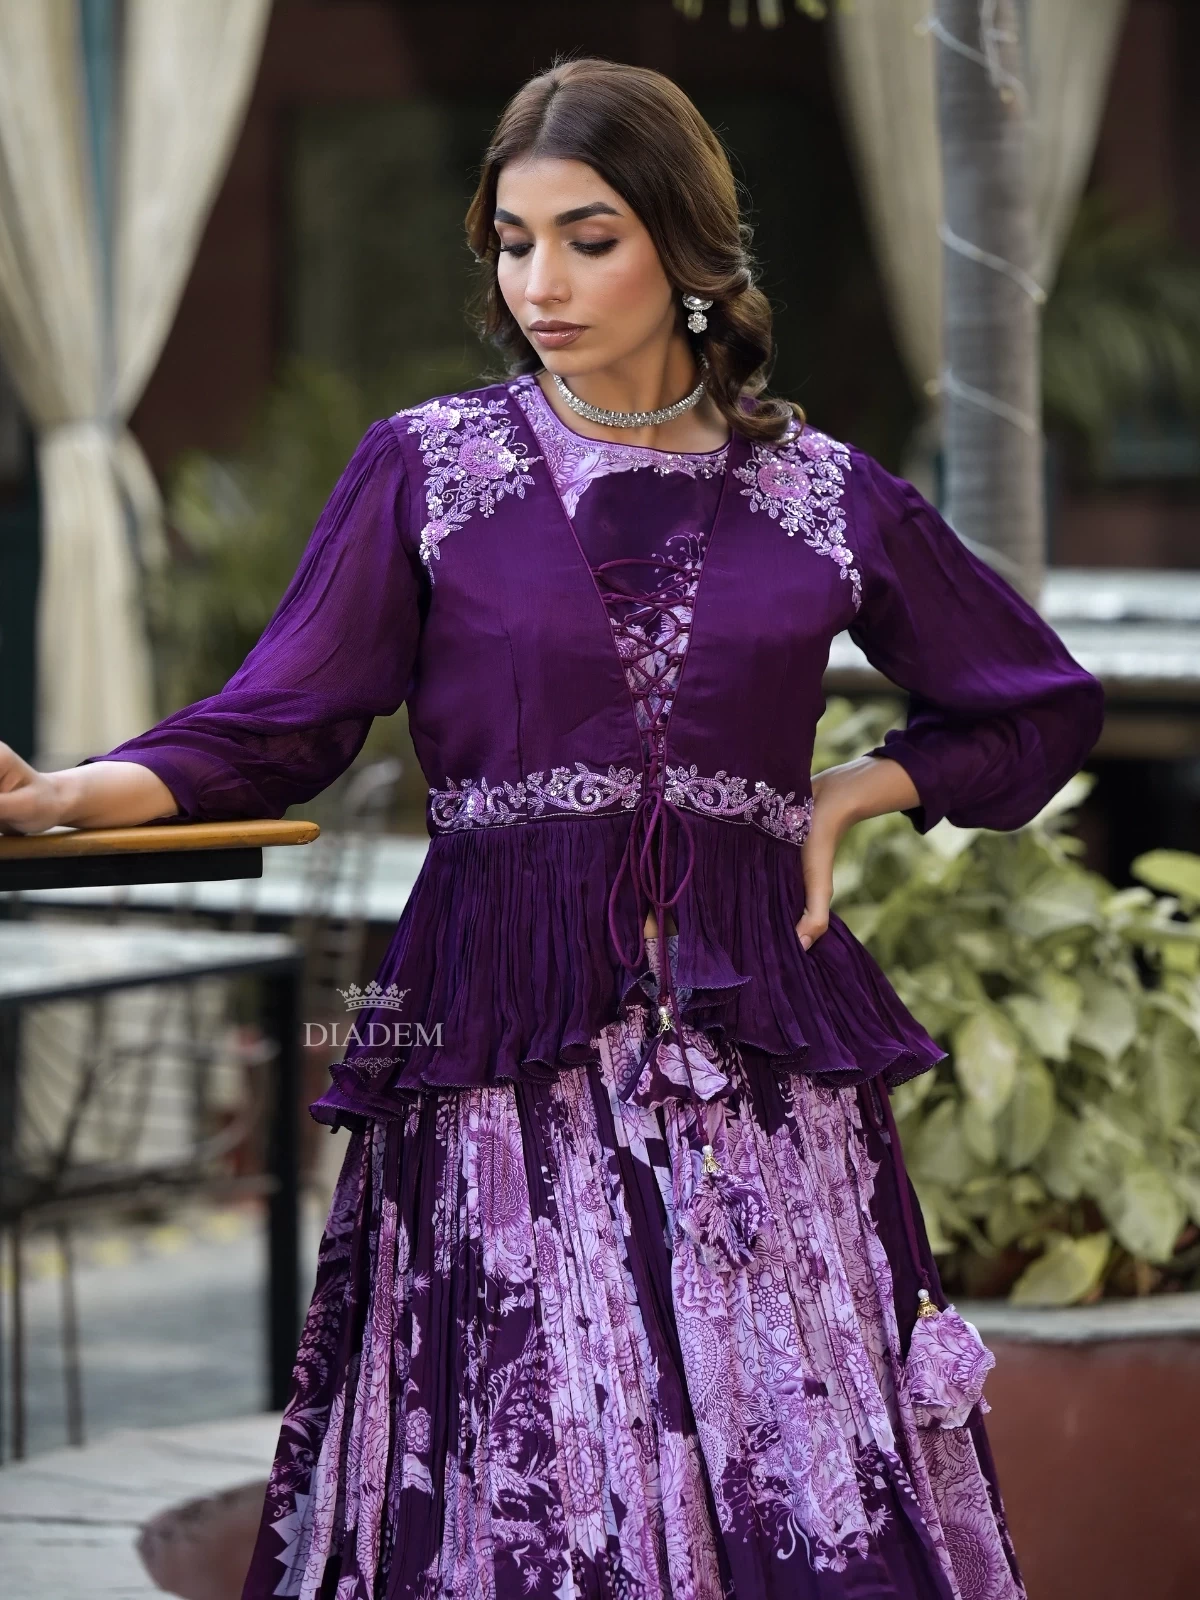 Purple Georgette Indo-western Lehenga Embellished With Floral Prints And Sequins, Paired With Overcoat